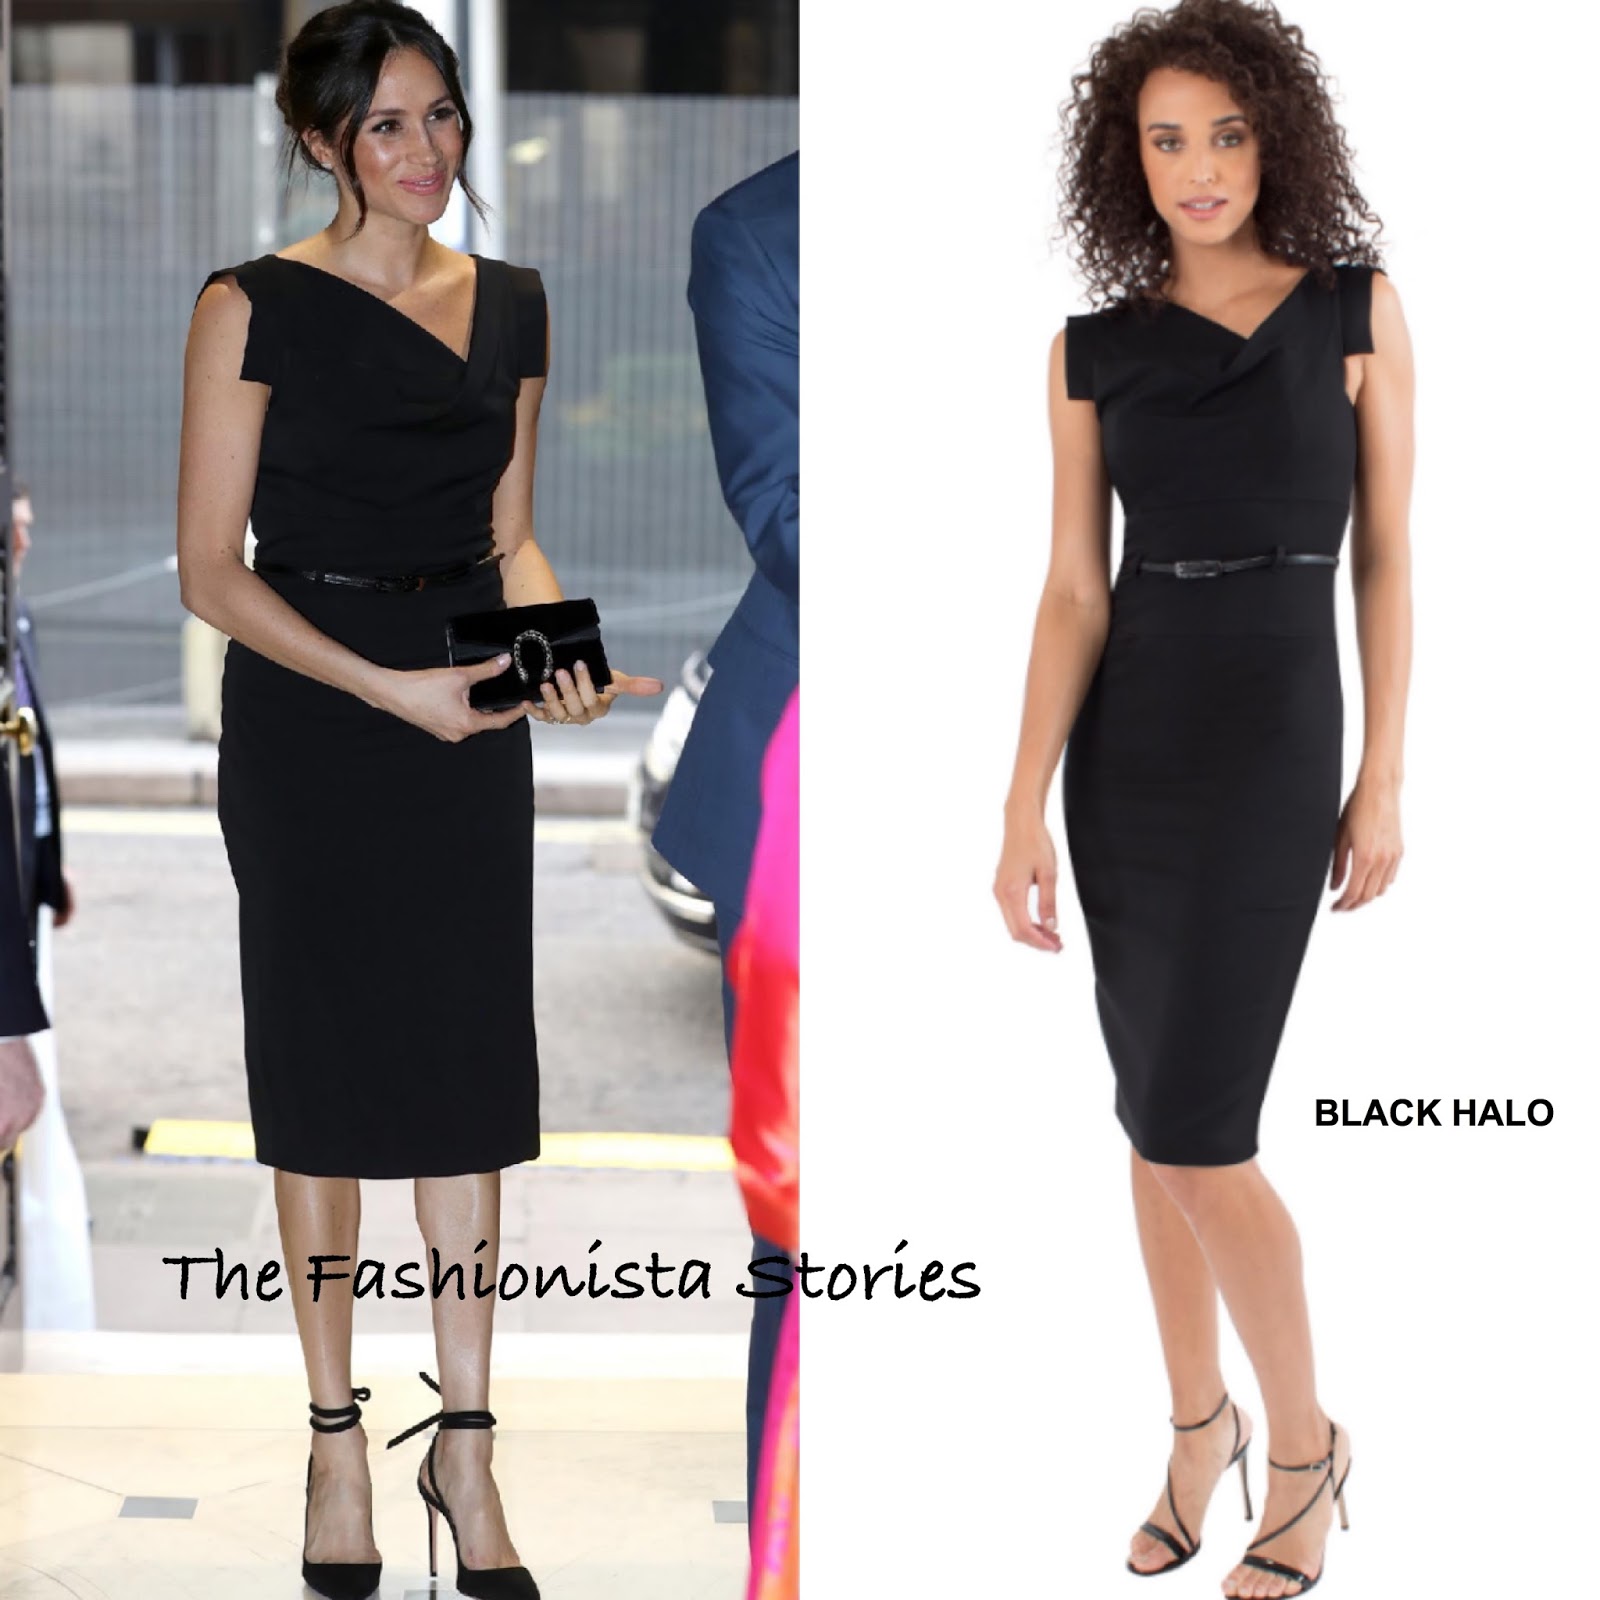 Meghan Markle in Black Halo at the Women's Empowerment Reception